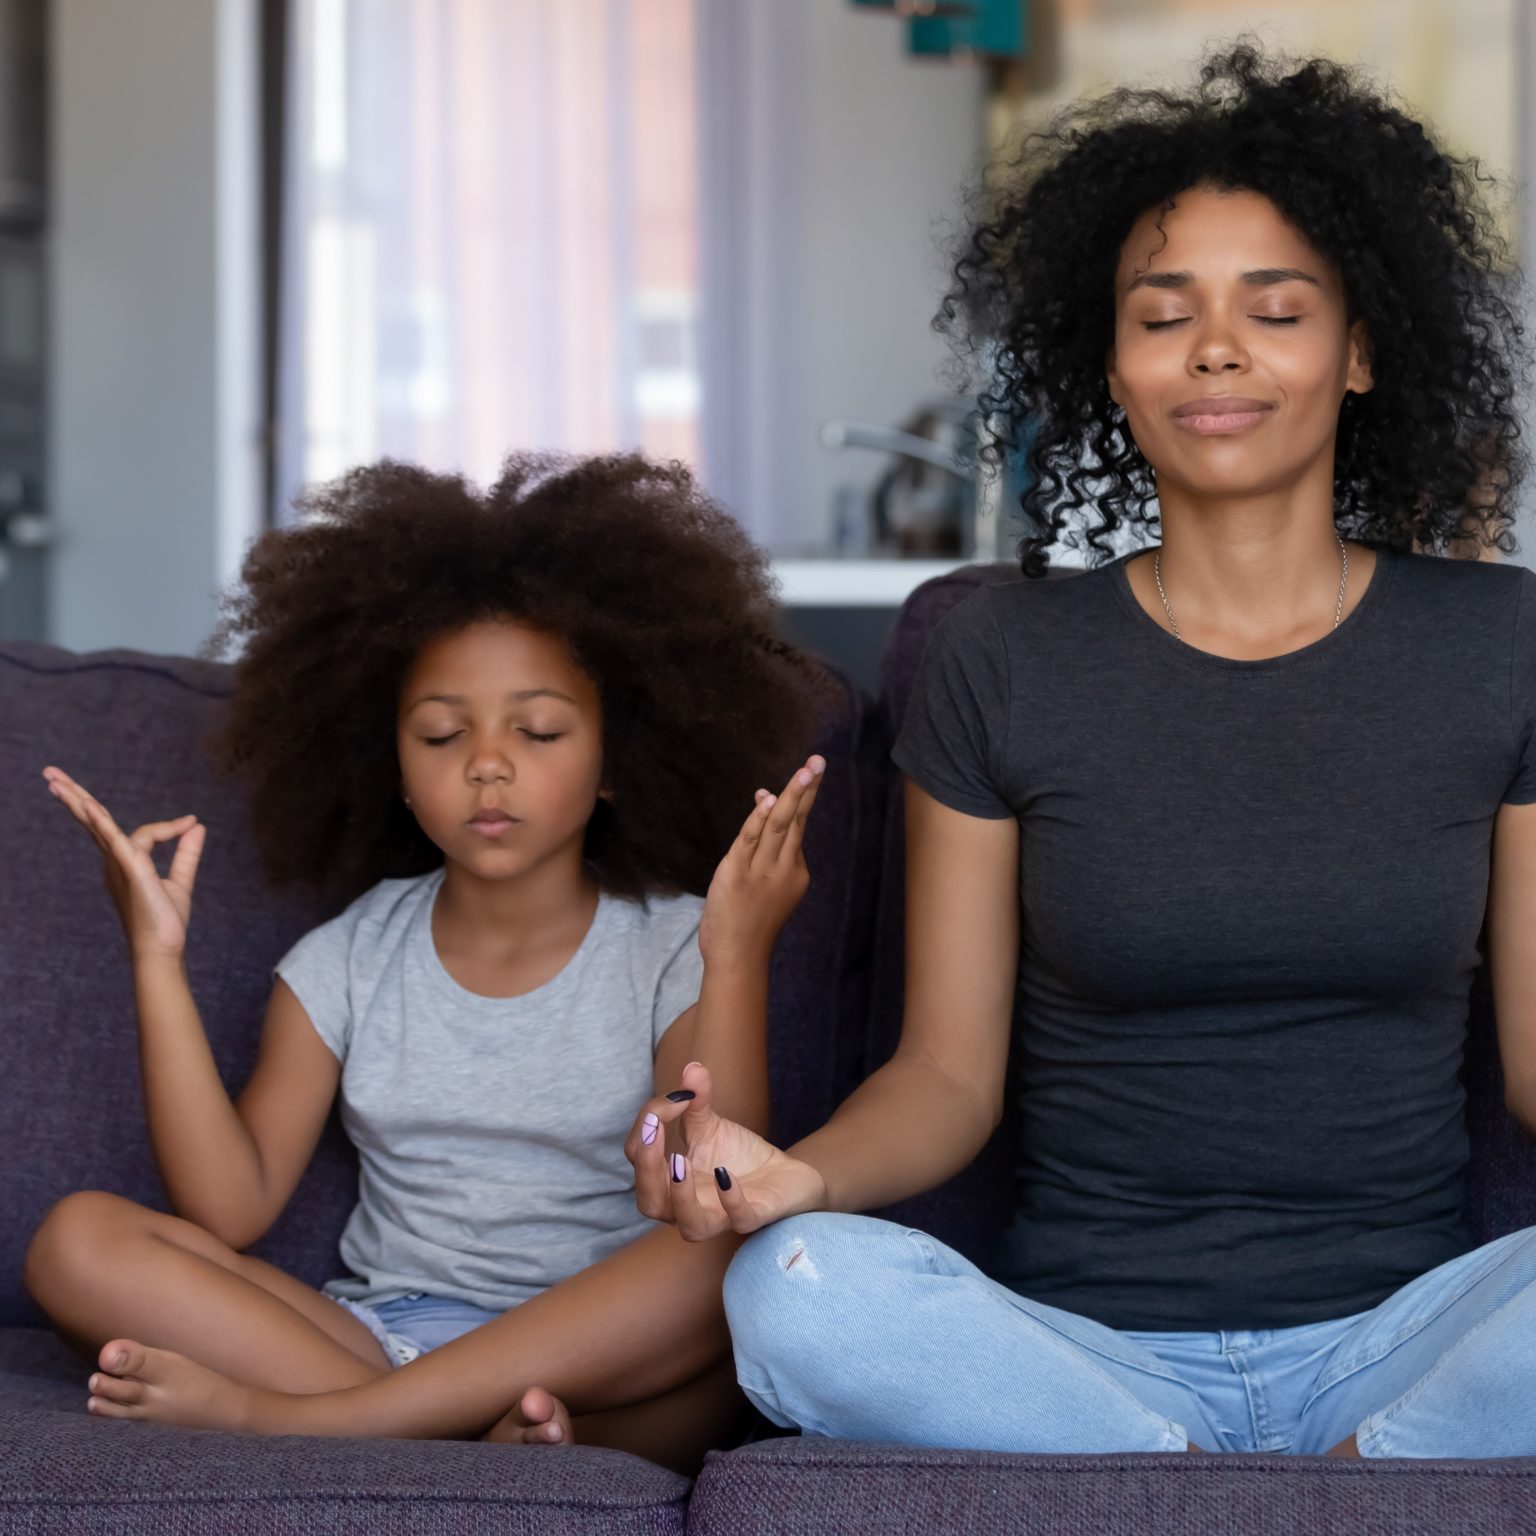 Cardiovascular Health - Mother and daughter meditating together on a couch, embodying a serene approach to lowering stress and managing blood pressure naturally with meditation techniques.